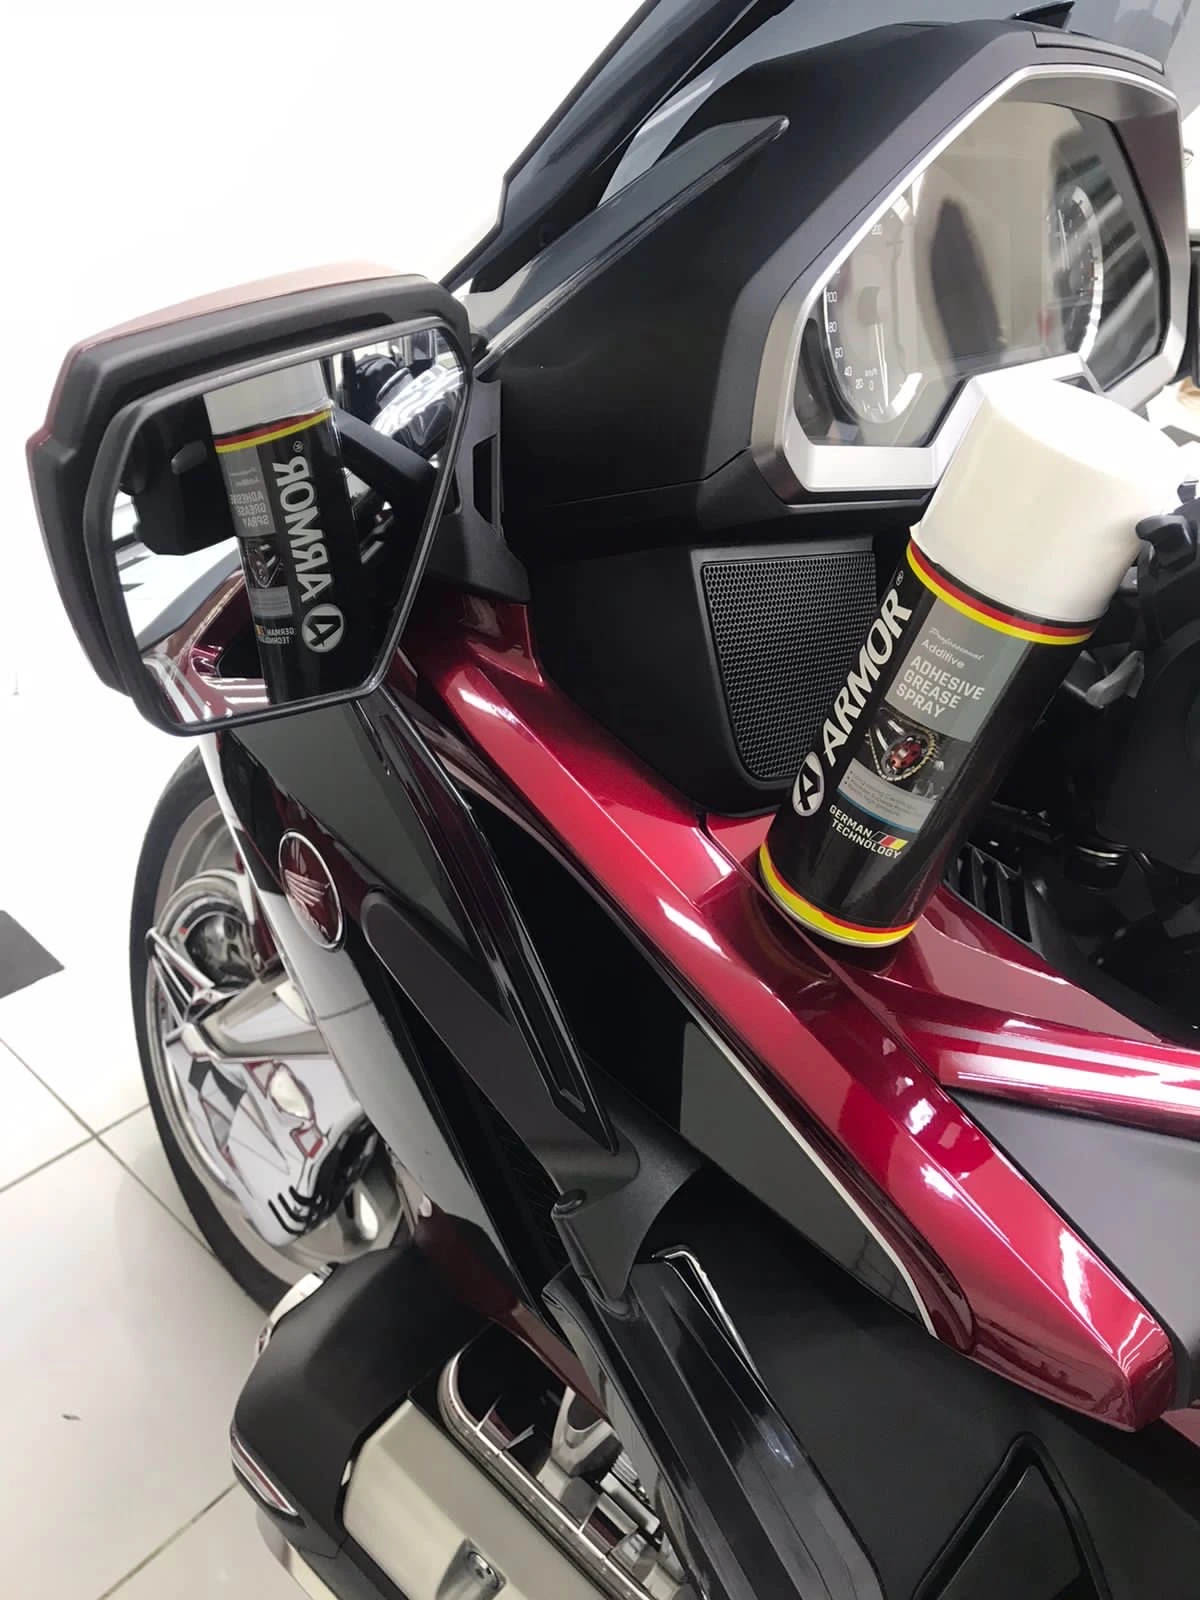 Armor Car Care Product Applied for Car Shining